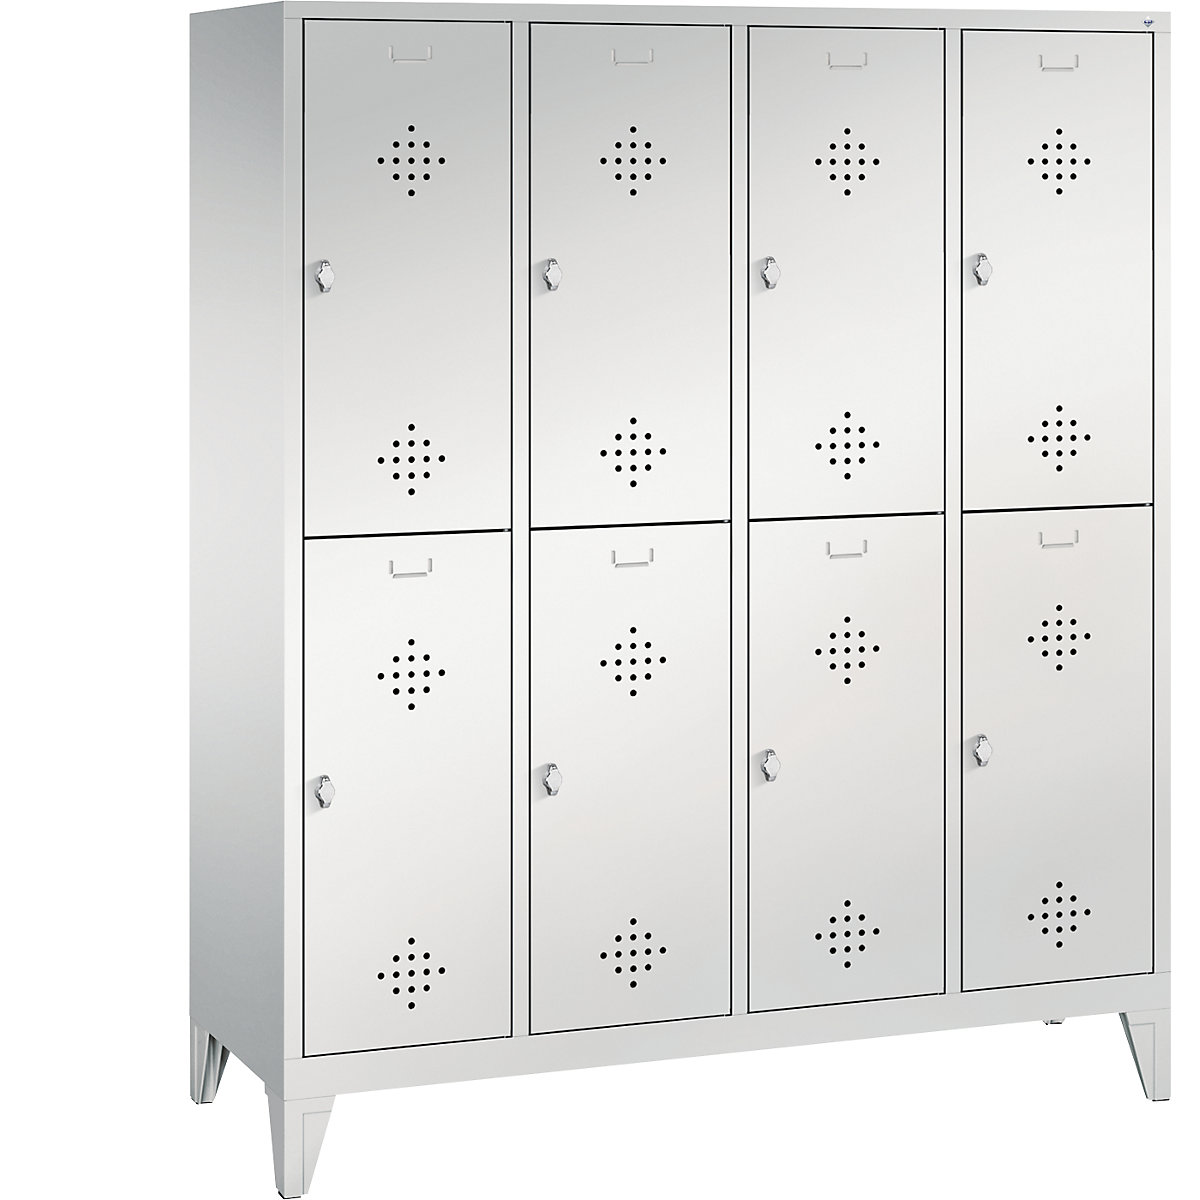 CLASSIC cloakroom locker with feet, double tier – C+P, 4 compartments, 2 shelf compartments each, compartment width 400 mm, light grey-9